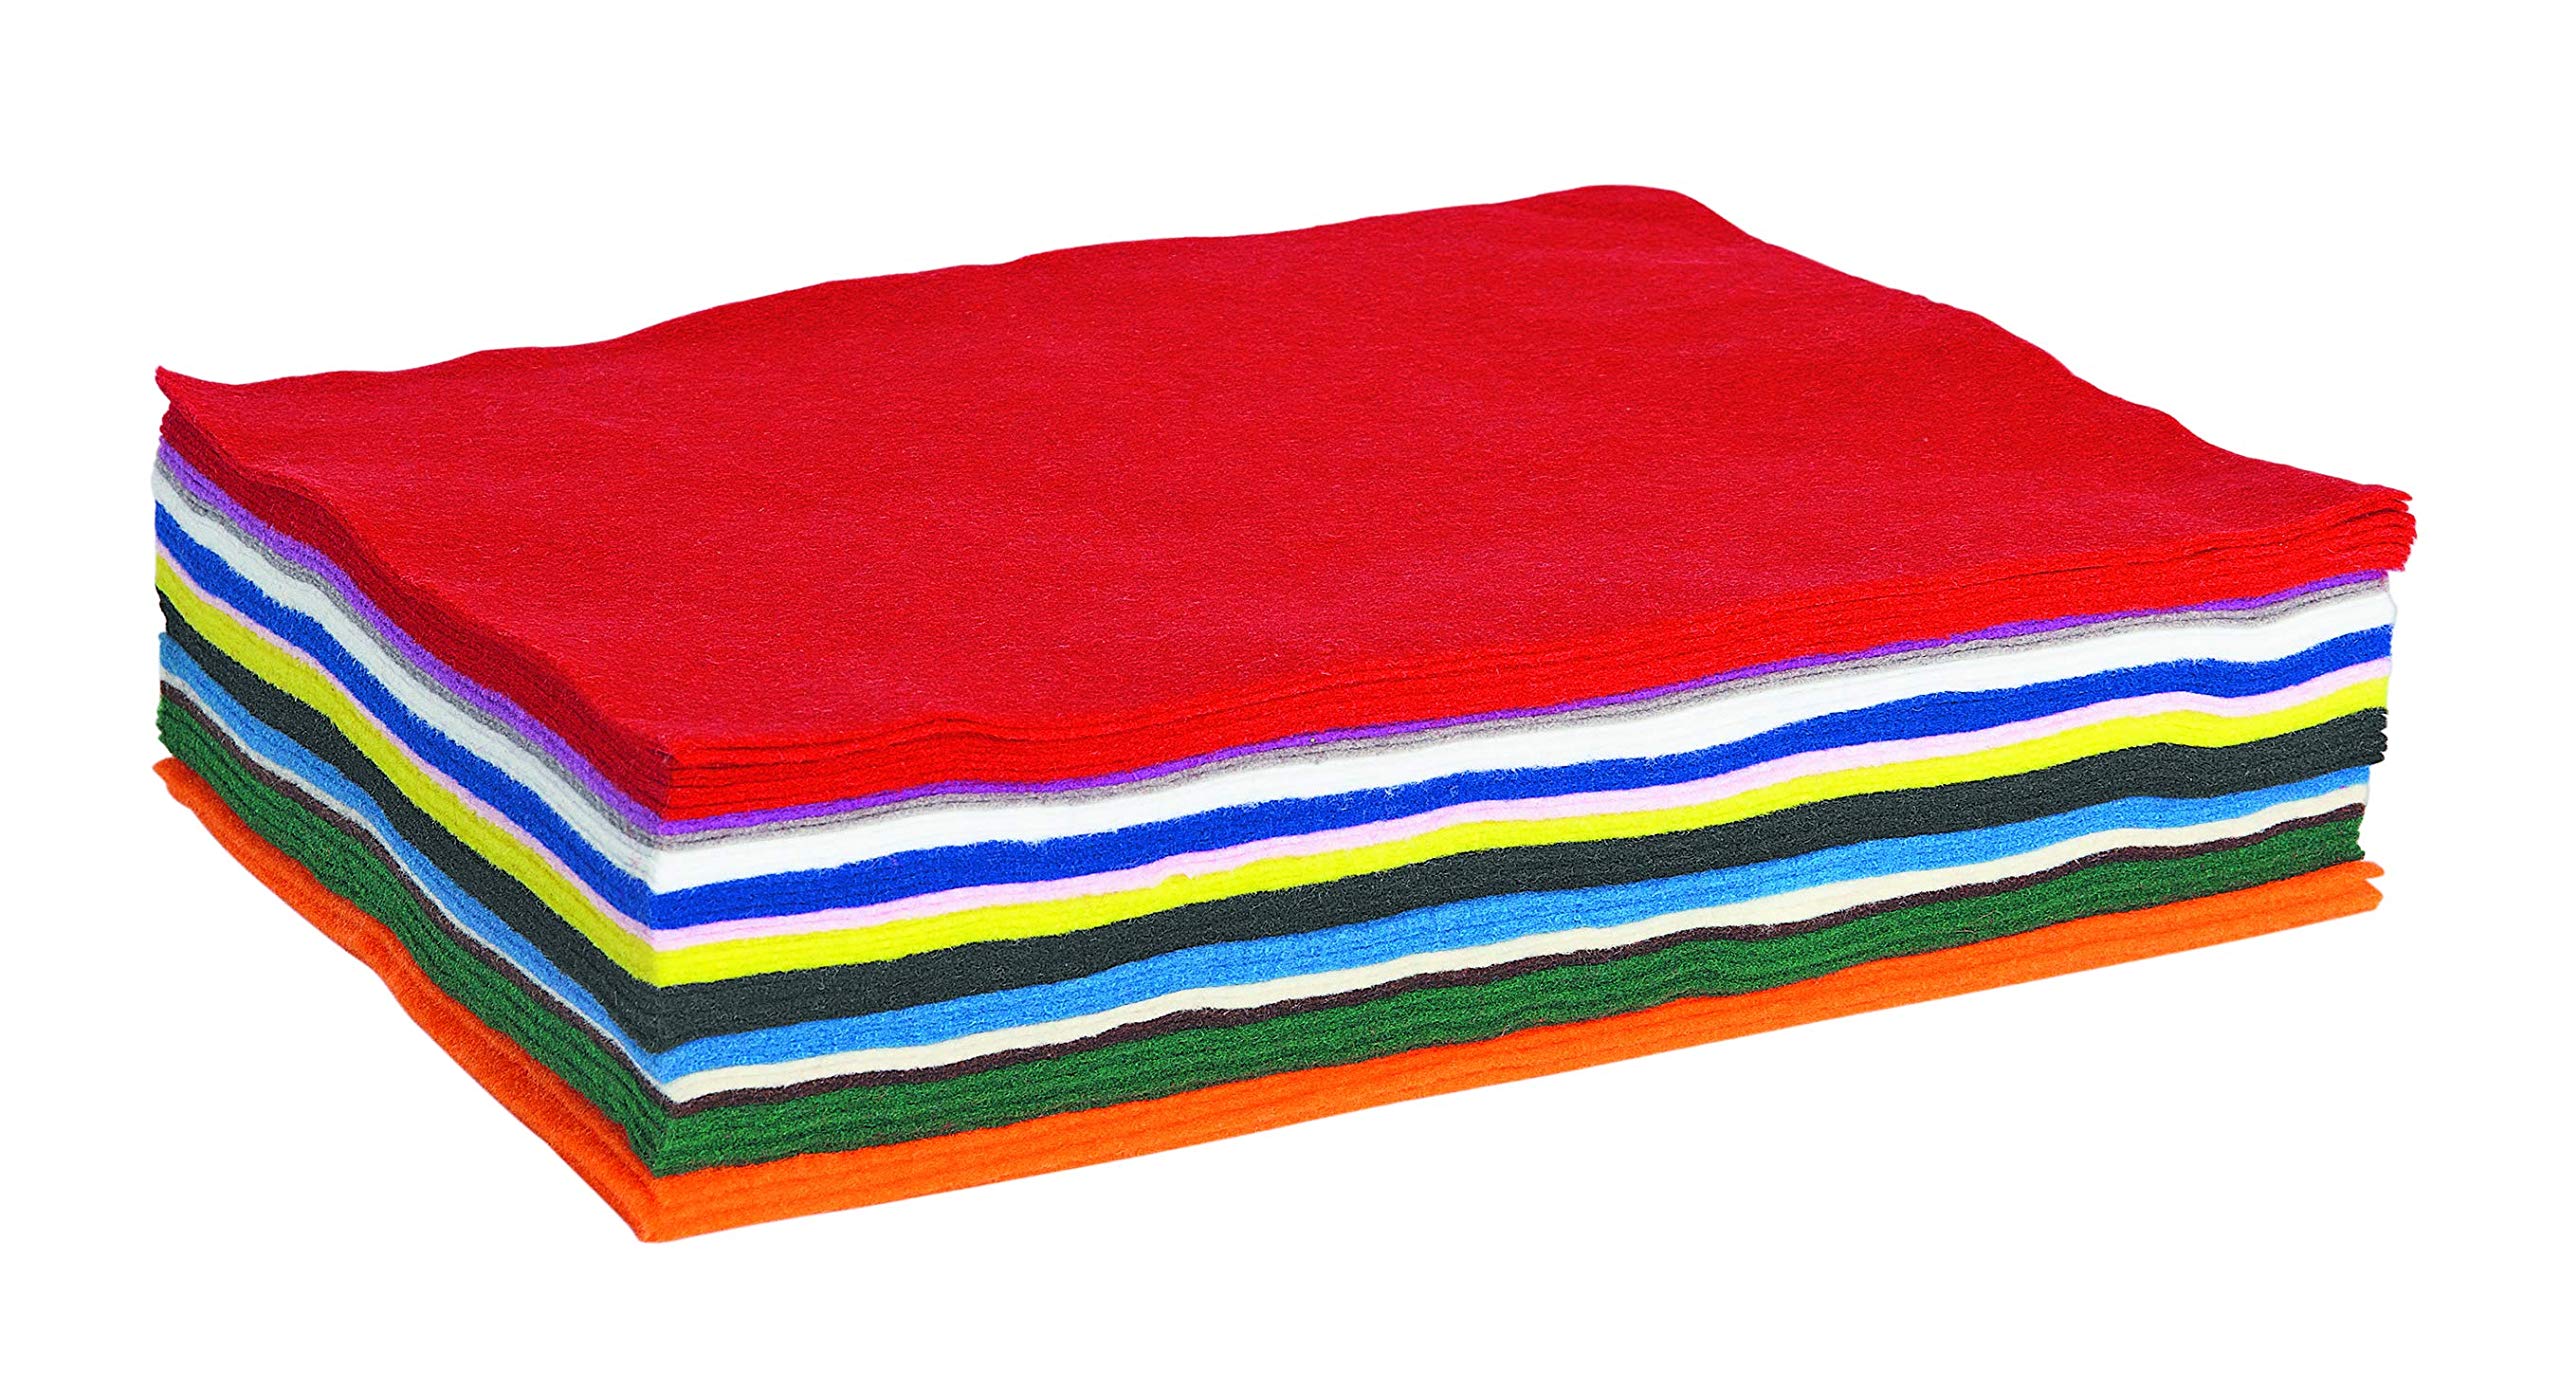 Colorations 100% Polyester Felt Sheets 9 inches x 12 inches, 13 colors, 1mm Thick, 50 Sheet Pack for Sewing and DIY Arts & Crafts Projects